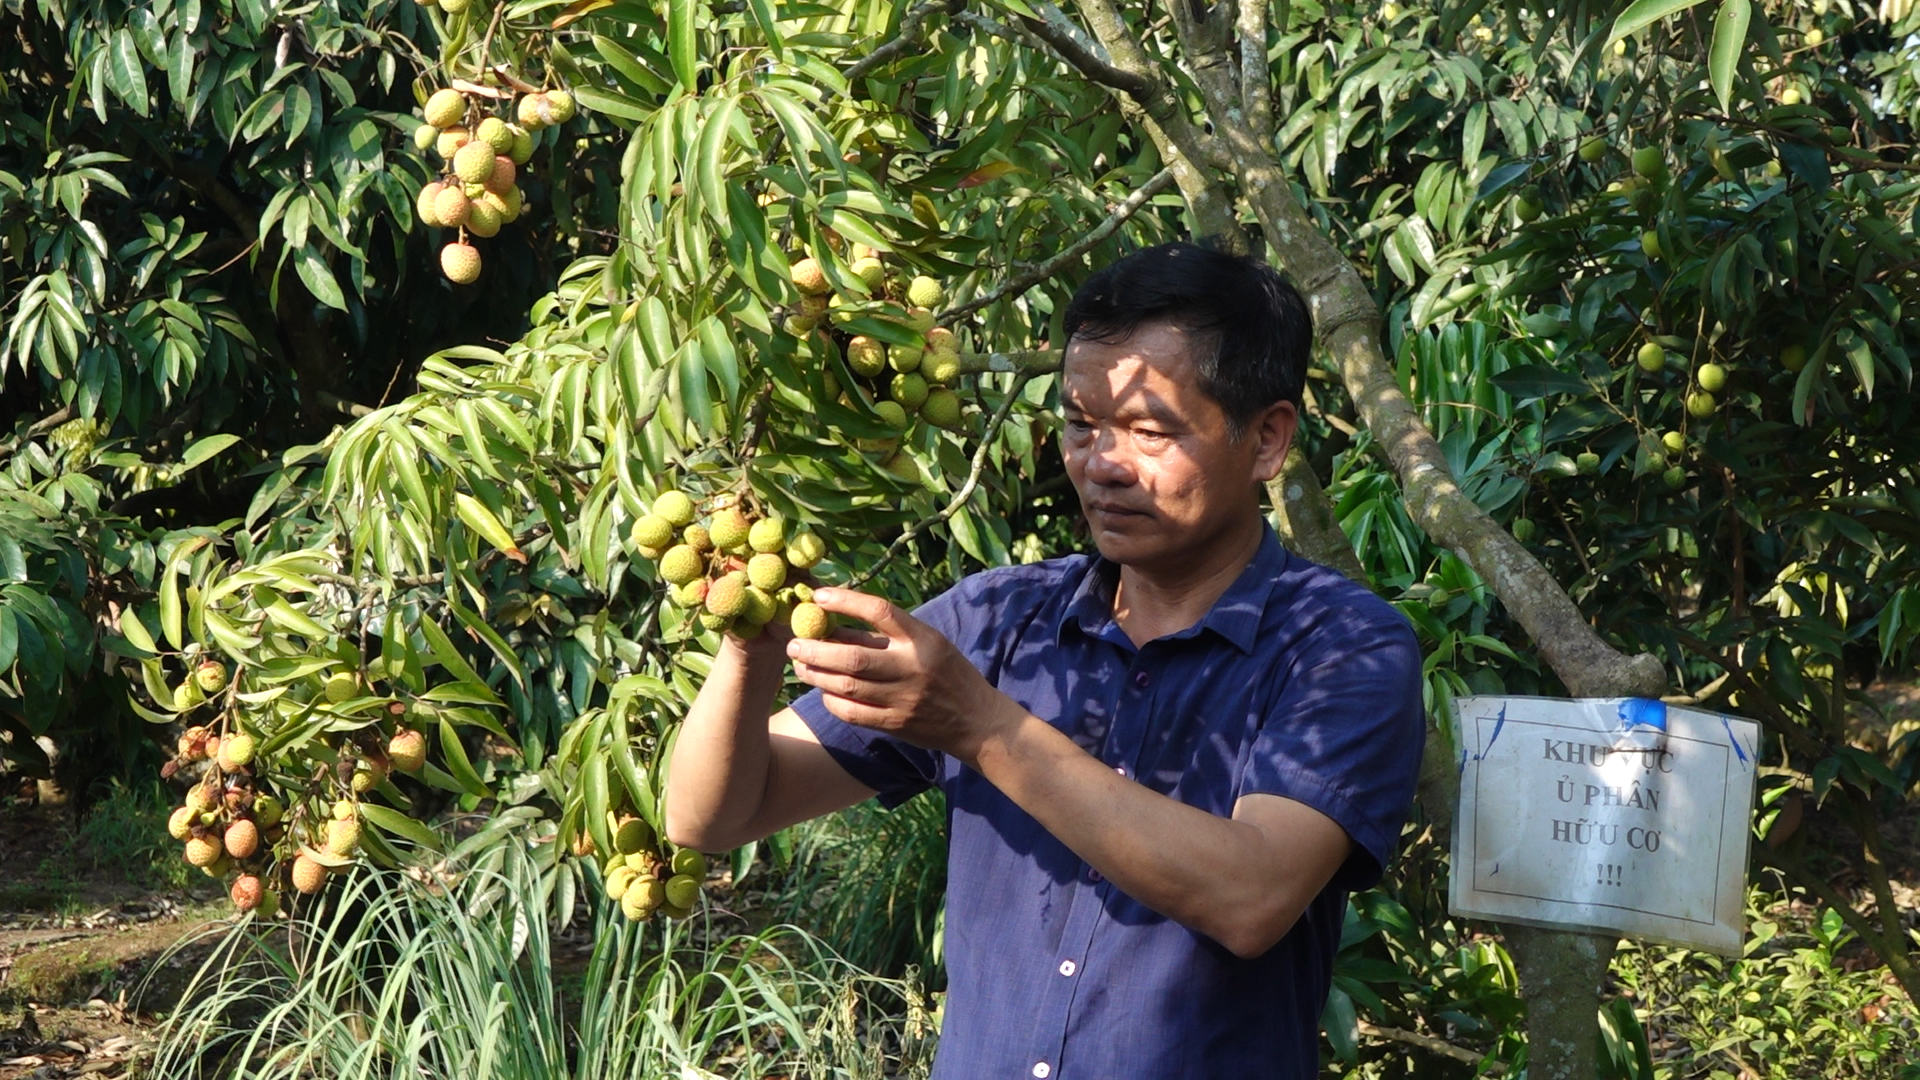 Having no fruit irradiation factory qualified to export products to the USA is considered a big difficulty for farmers and businesses in the Northern region. Photo: Quang Linh.